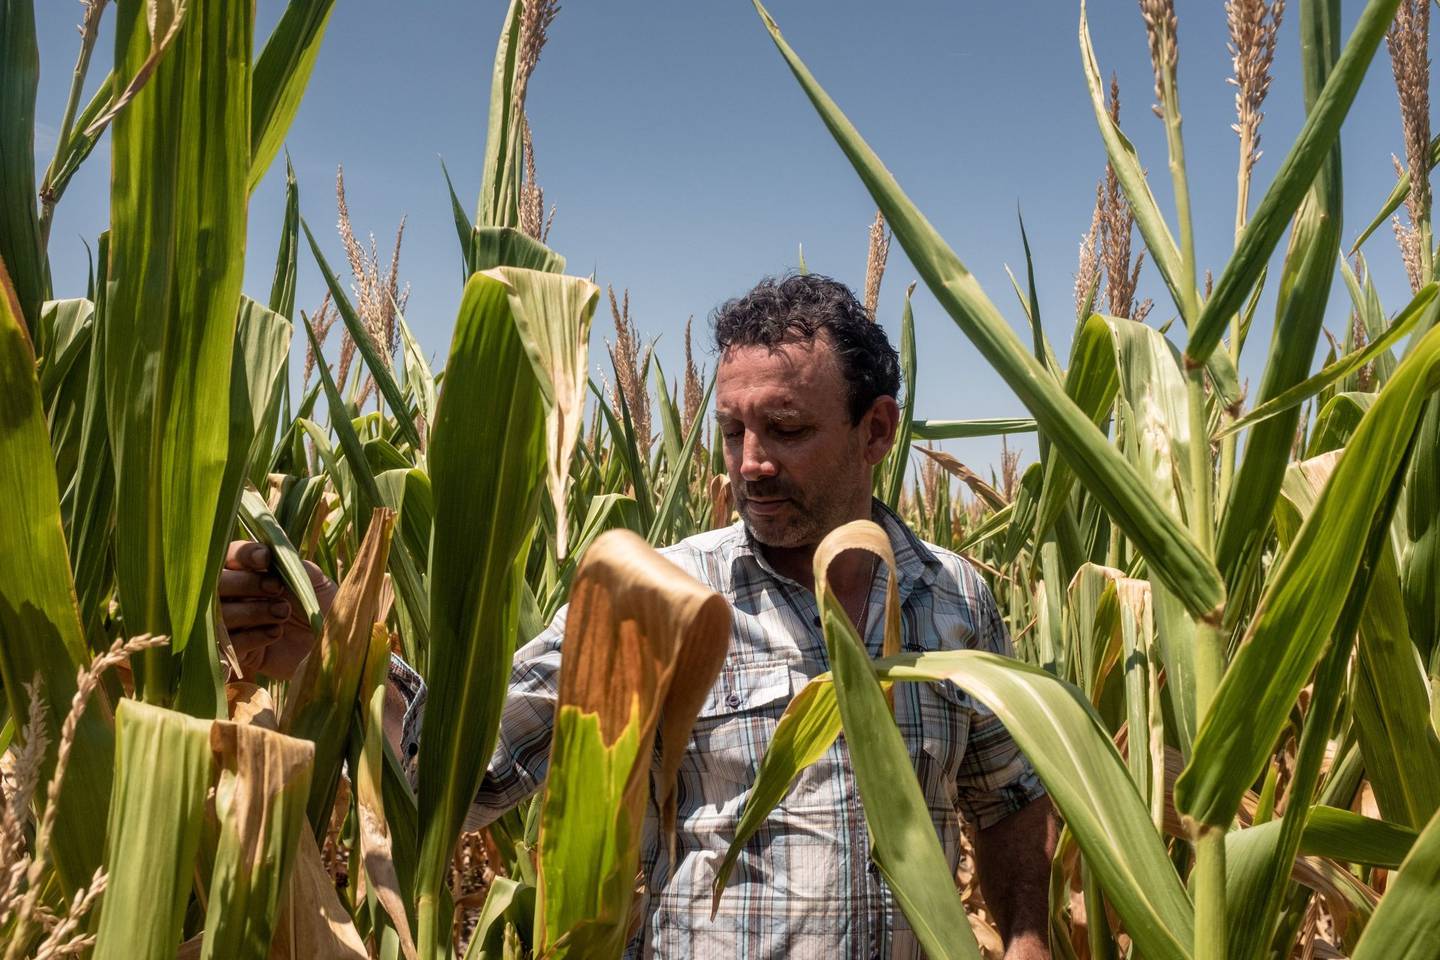 A farmer inspects ears of corn during a heat wave in Zarate, Buenos Aires province, Argentina, on Tuesday, Jan. 11, 2022. Argentinas key agriculture areas saw intense and prolonged heat, coupled with little or no rain, through Jan. 12. Photographer: Anita Pouchard Serra/Bloombergdfd